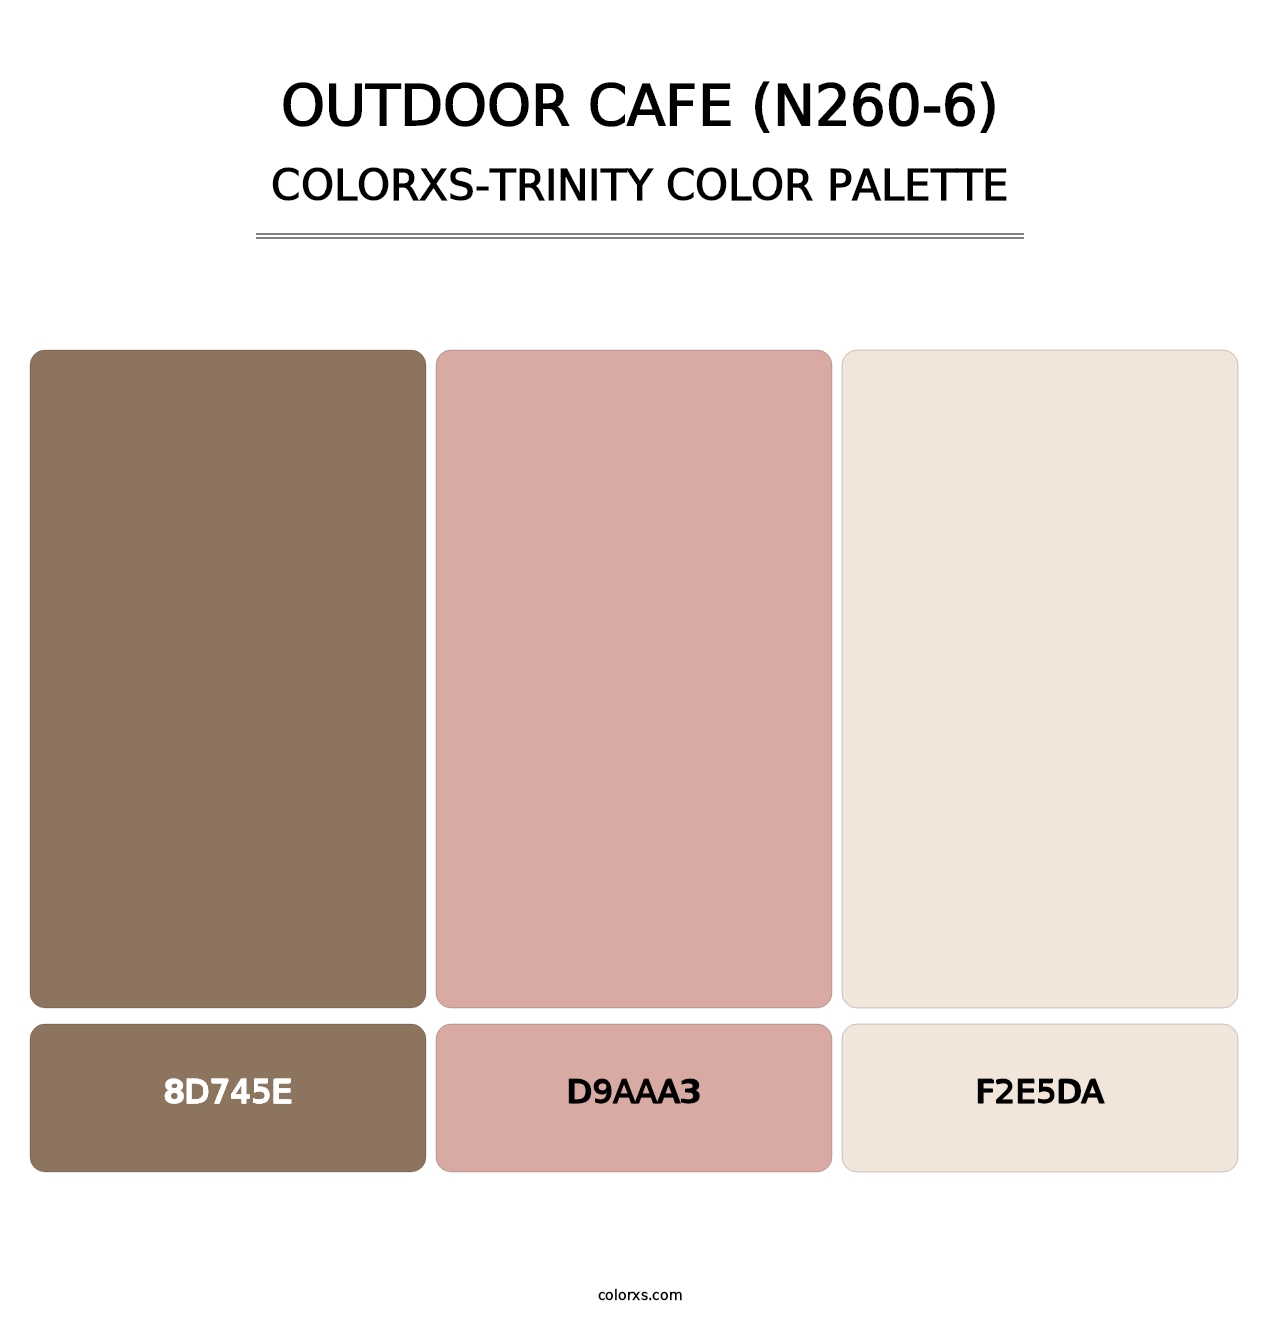 Outdoor Cafe (N260-6) - Colorxs Trinity Palette